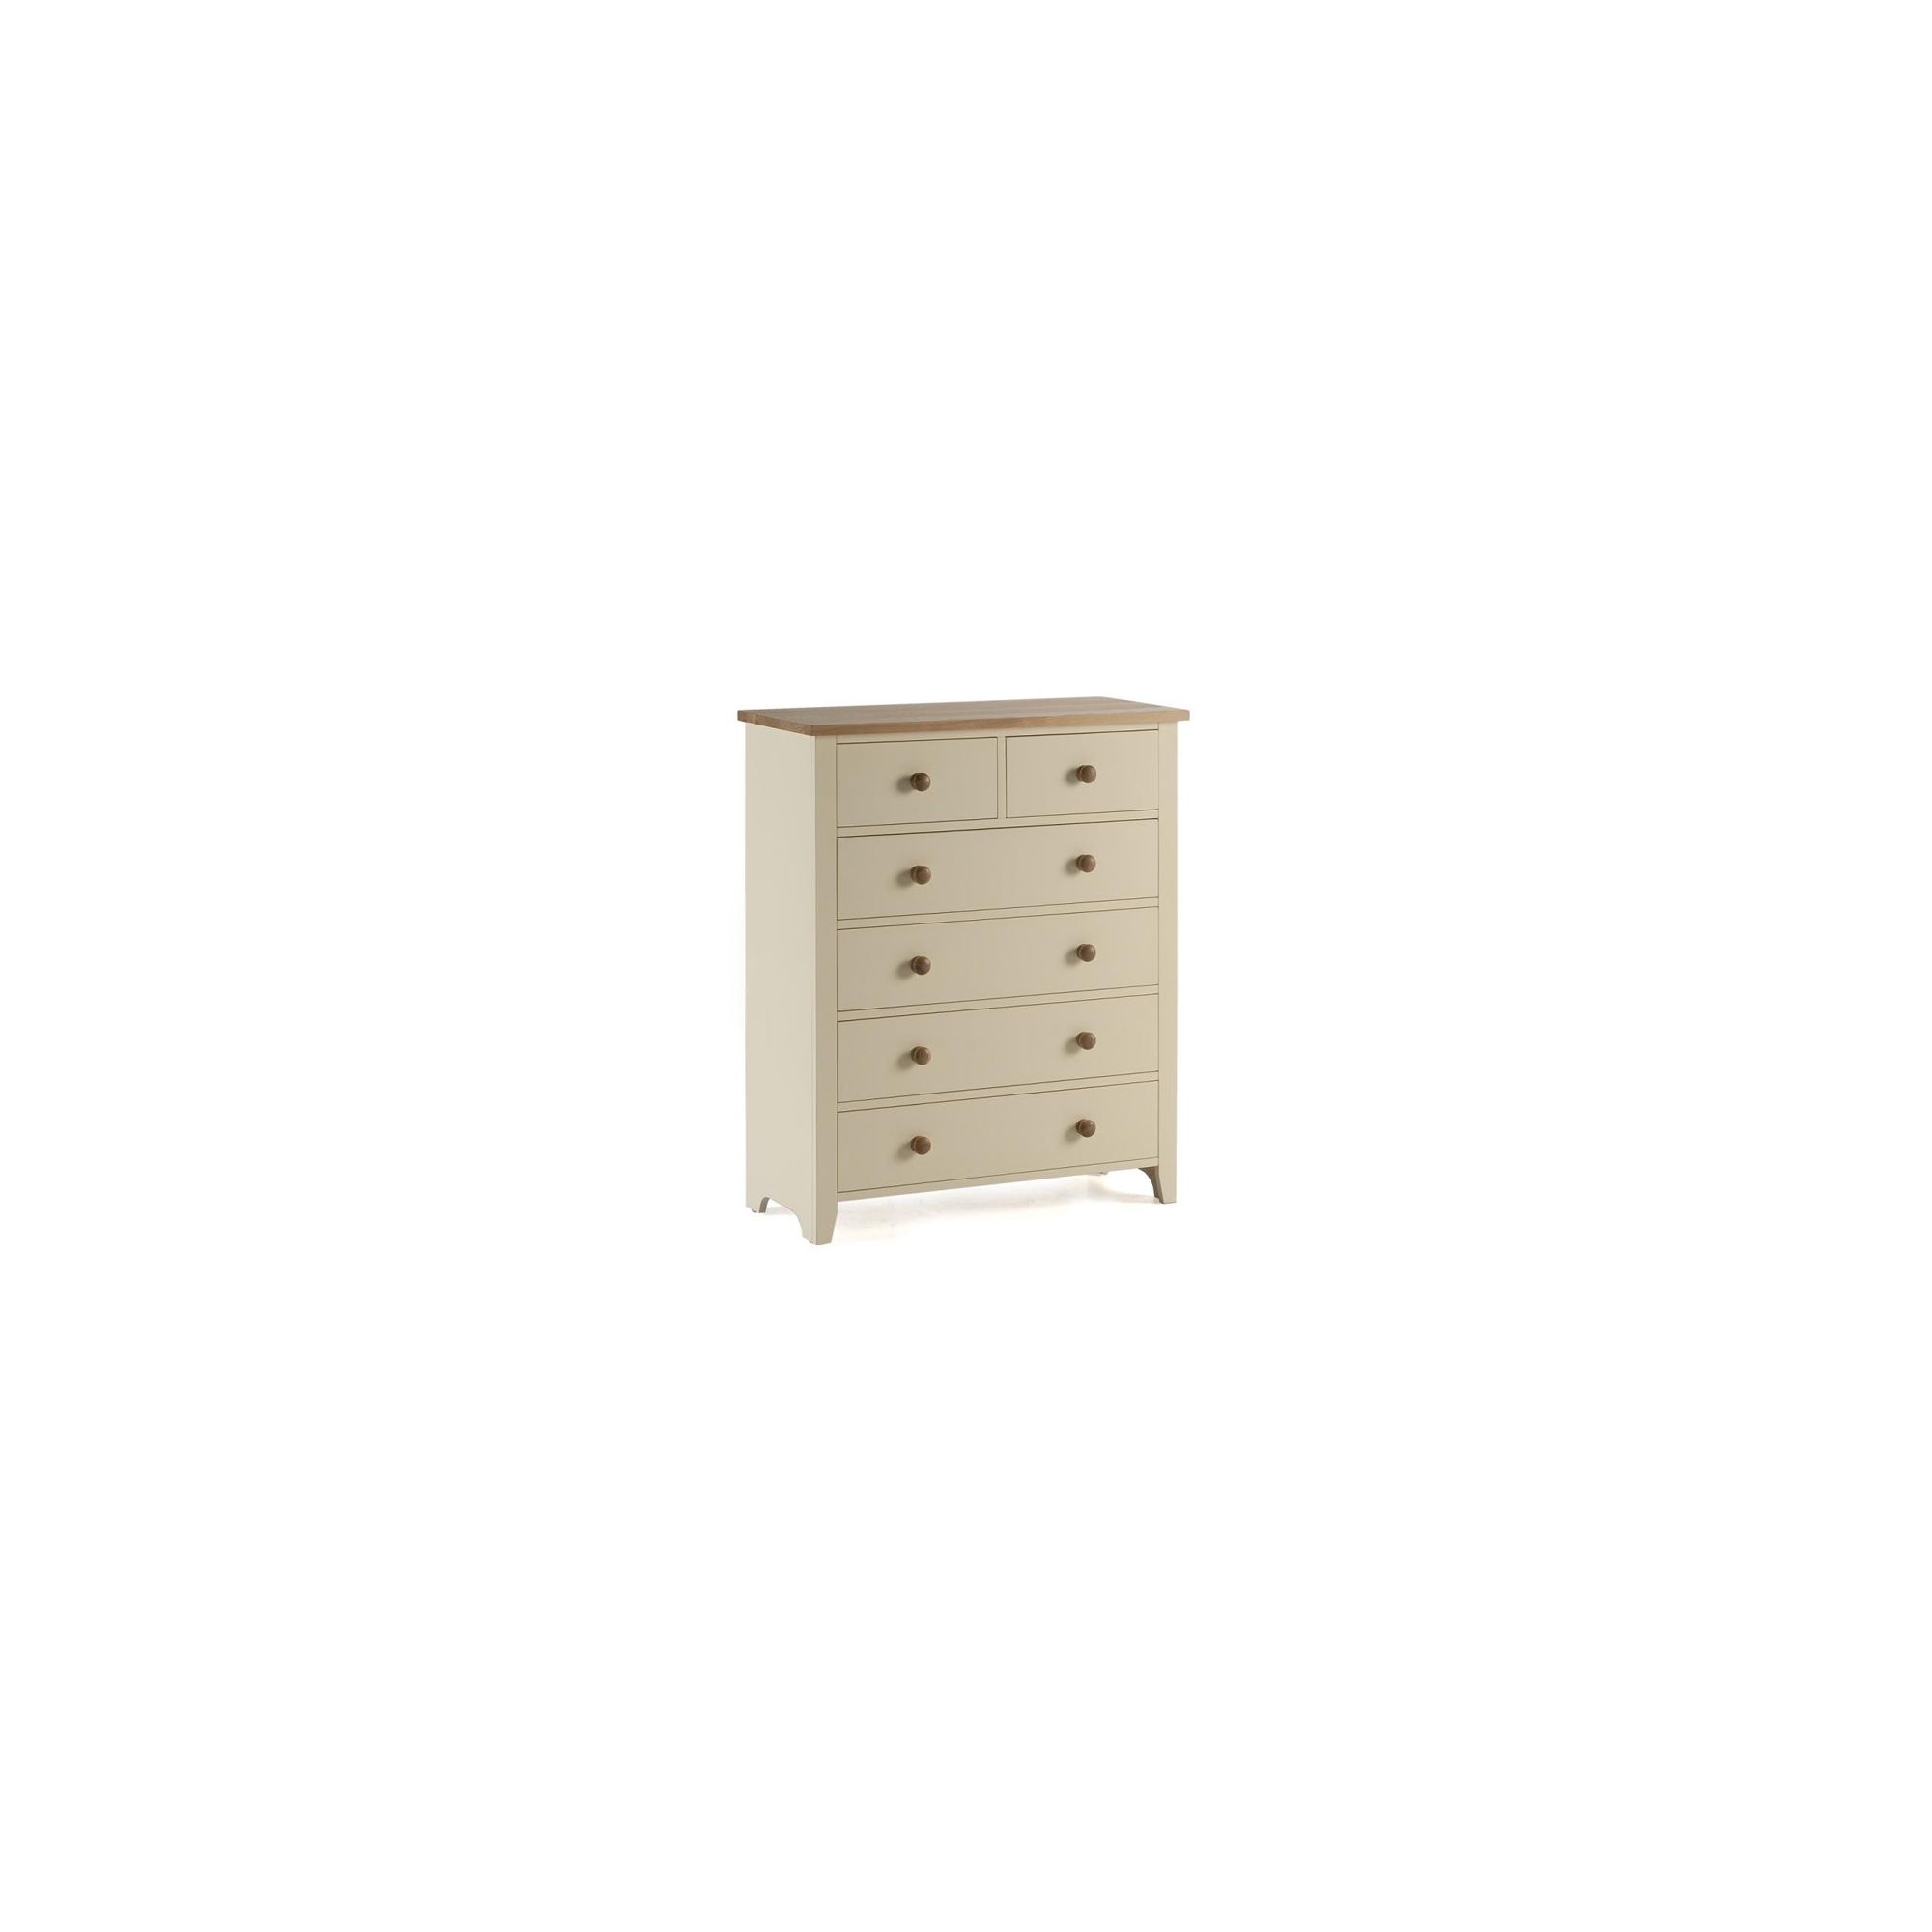 Ametis Camden Painted Pine and Ash Deep Chest in Painted Ivory - 90cm at Tesco Direct